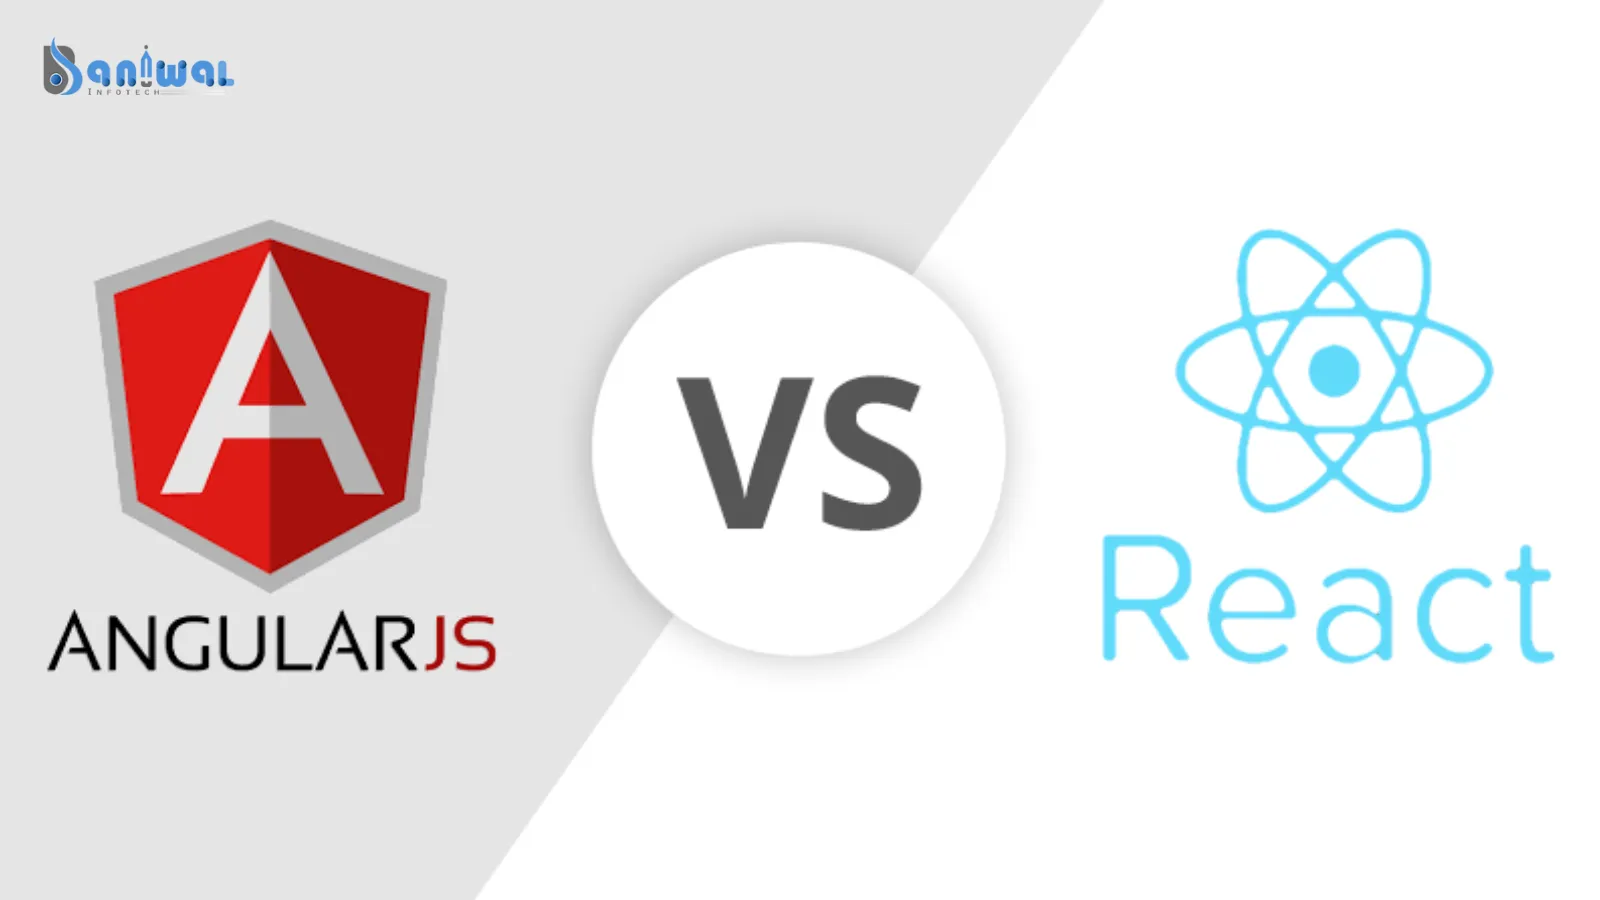 Angularjs Vs ReactJs: Baniwal Infotech will suggest to you Which one i